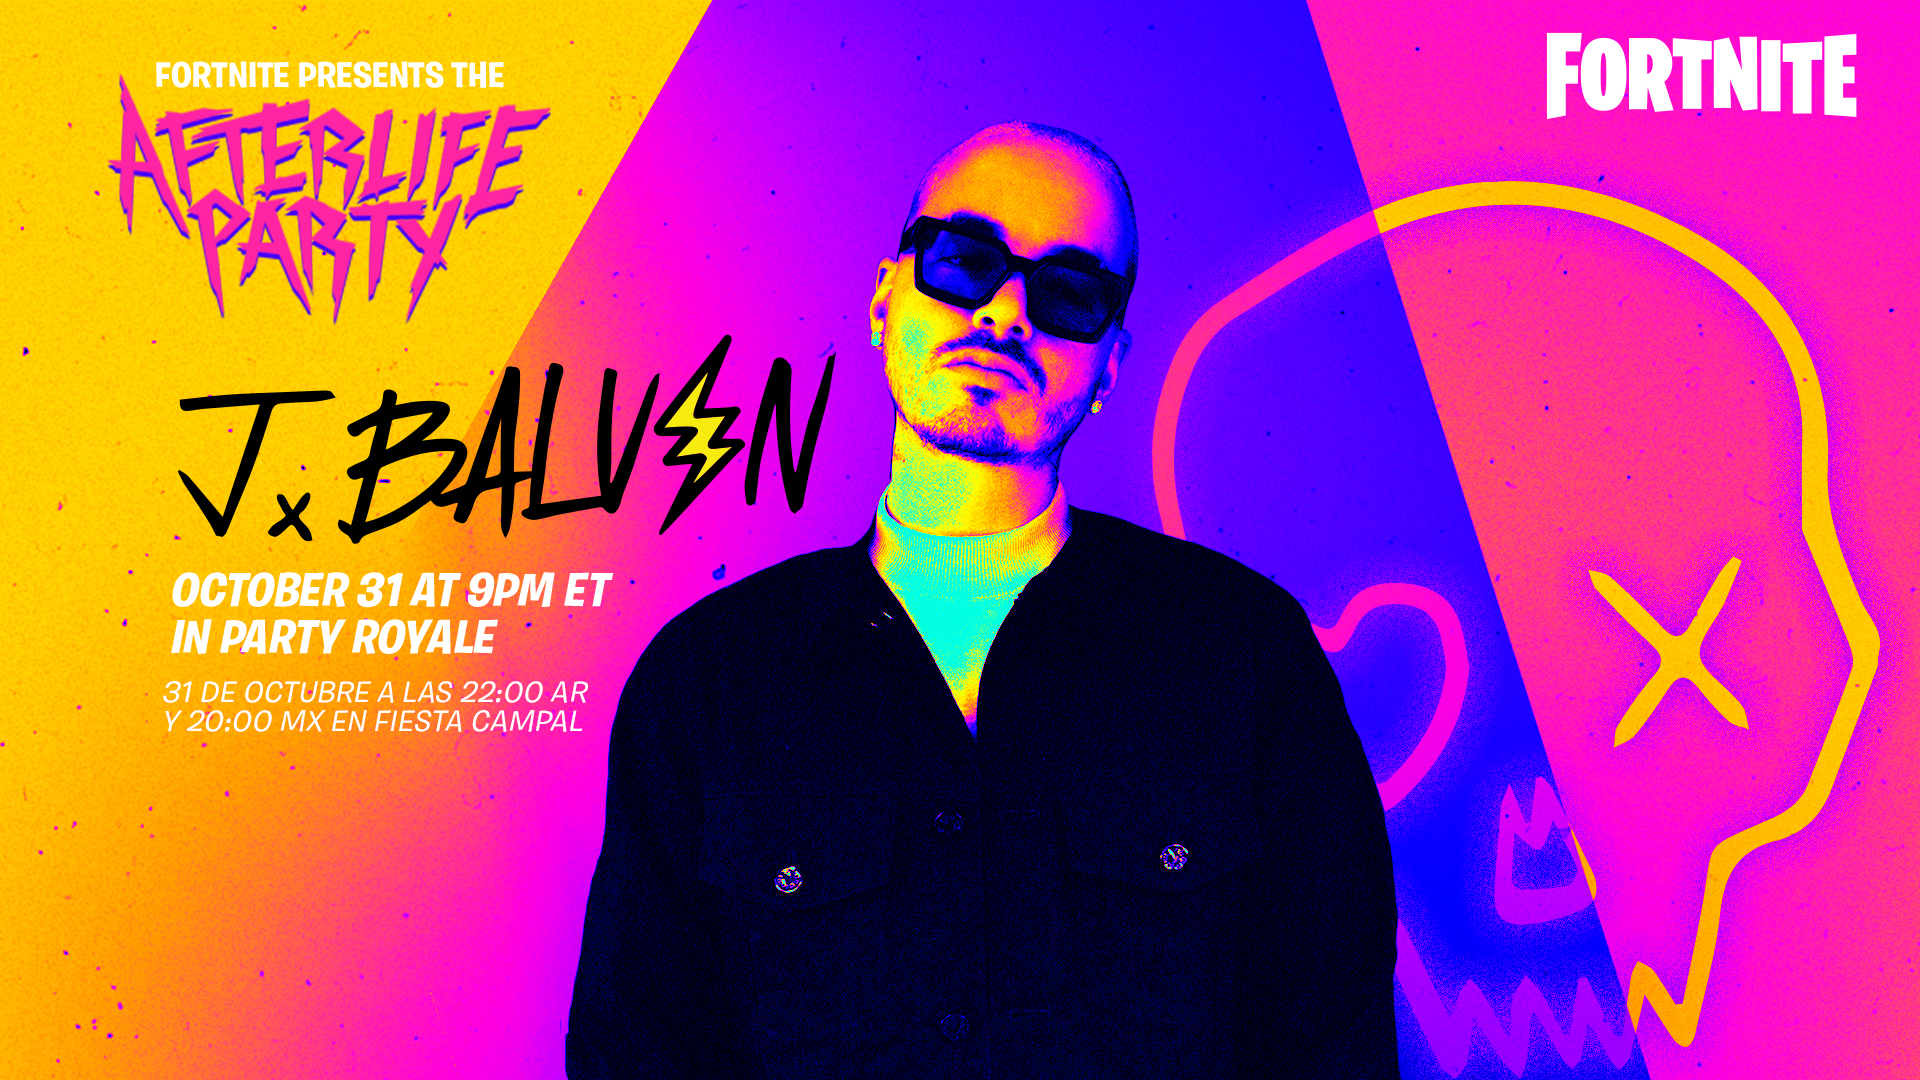 Fortnite S Afterlife Party Featuring J Balvin Announced Business Wire